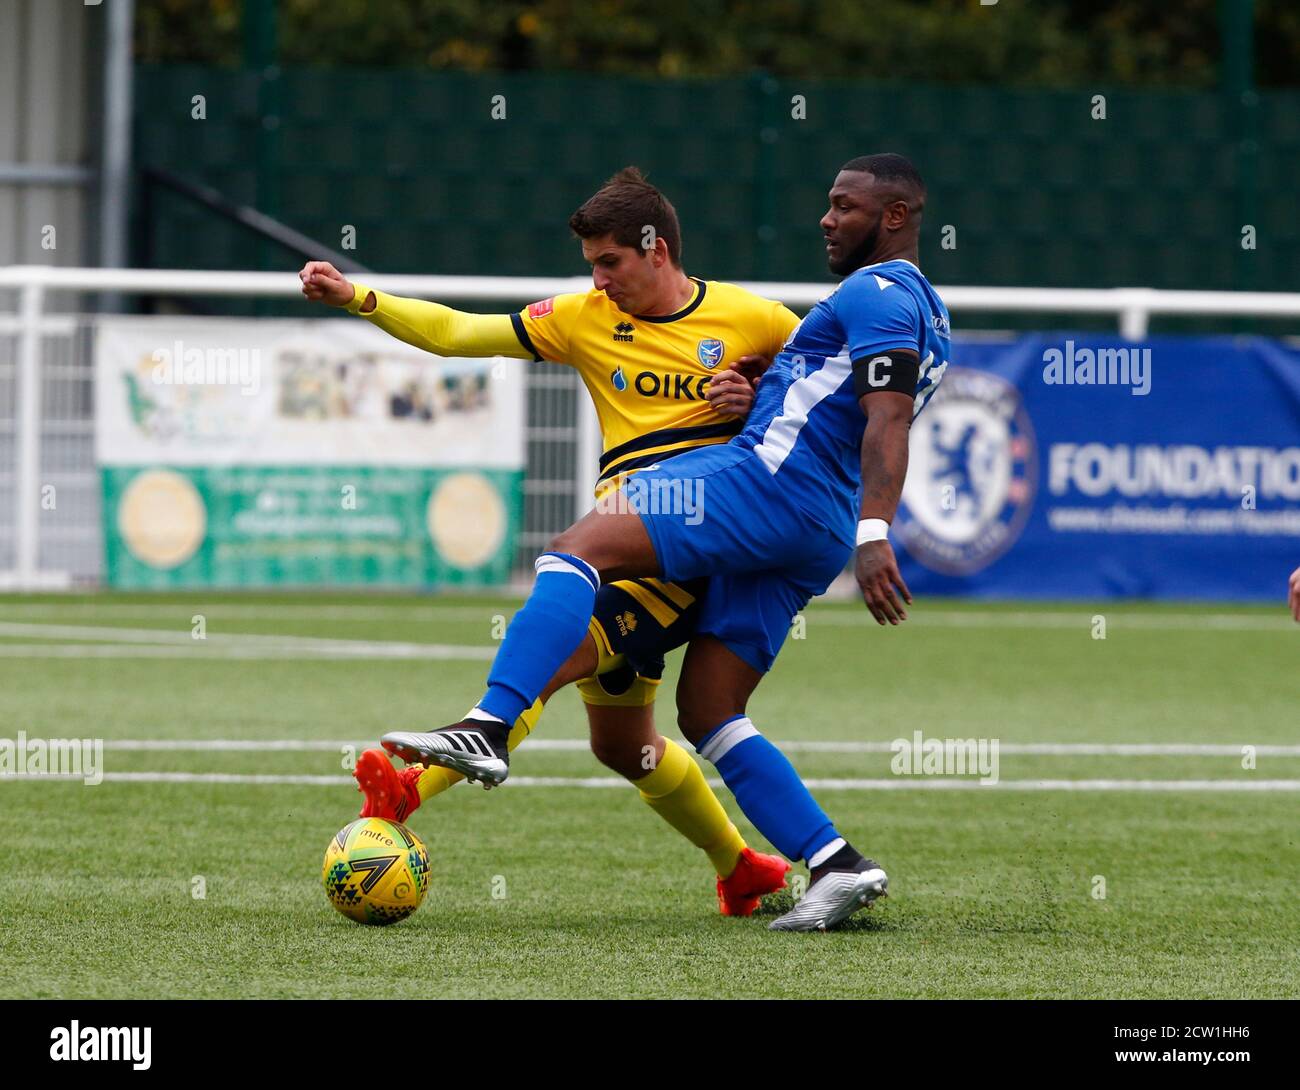 Aveley, UK. 01st Feb, 2018. AVELEY, ENGLAND - SEPTEMBER 26: L-R Rob Girdlestone of Canvey Island and Joro Martins Pais De Carlos of Greys Athelticduring Pitchingin Isthmain League Division One North between Grays Athletic and Canvey Island at Parkside, Aveley, UK on 26th September 2020 Credit: Action Foto Sport/Alamy Live News Stock Photo